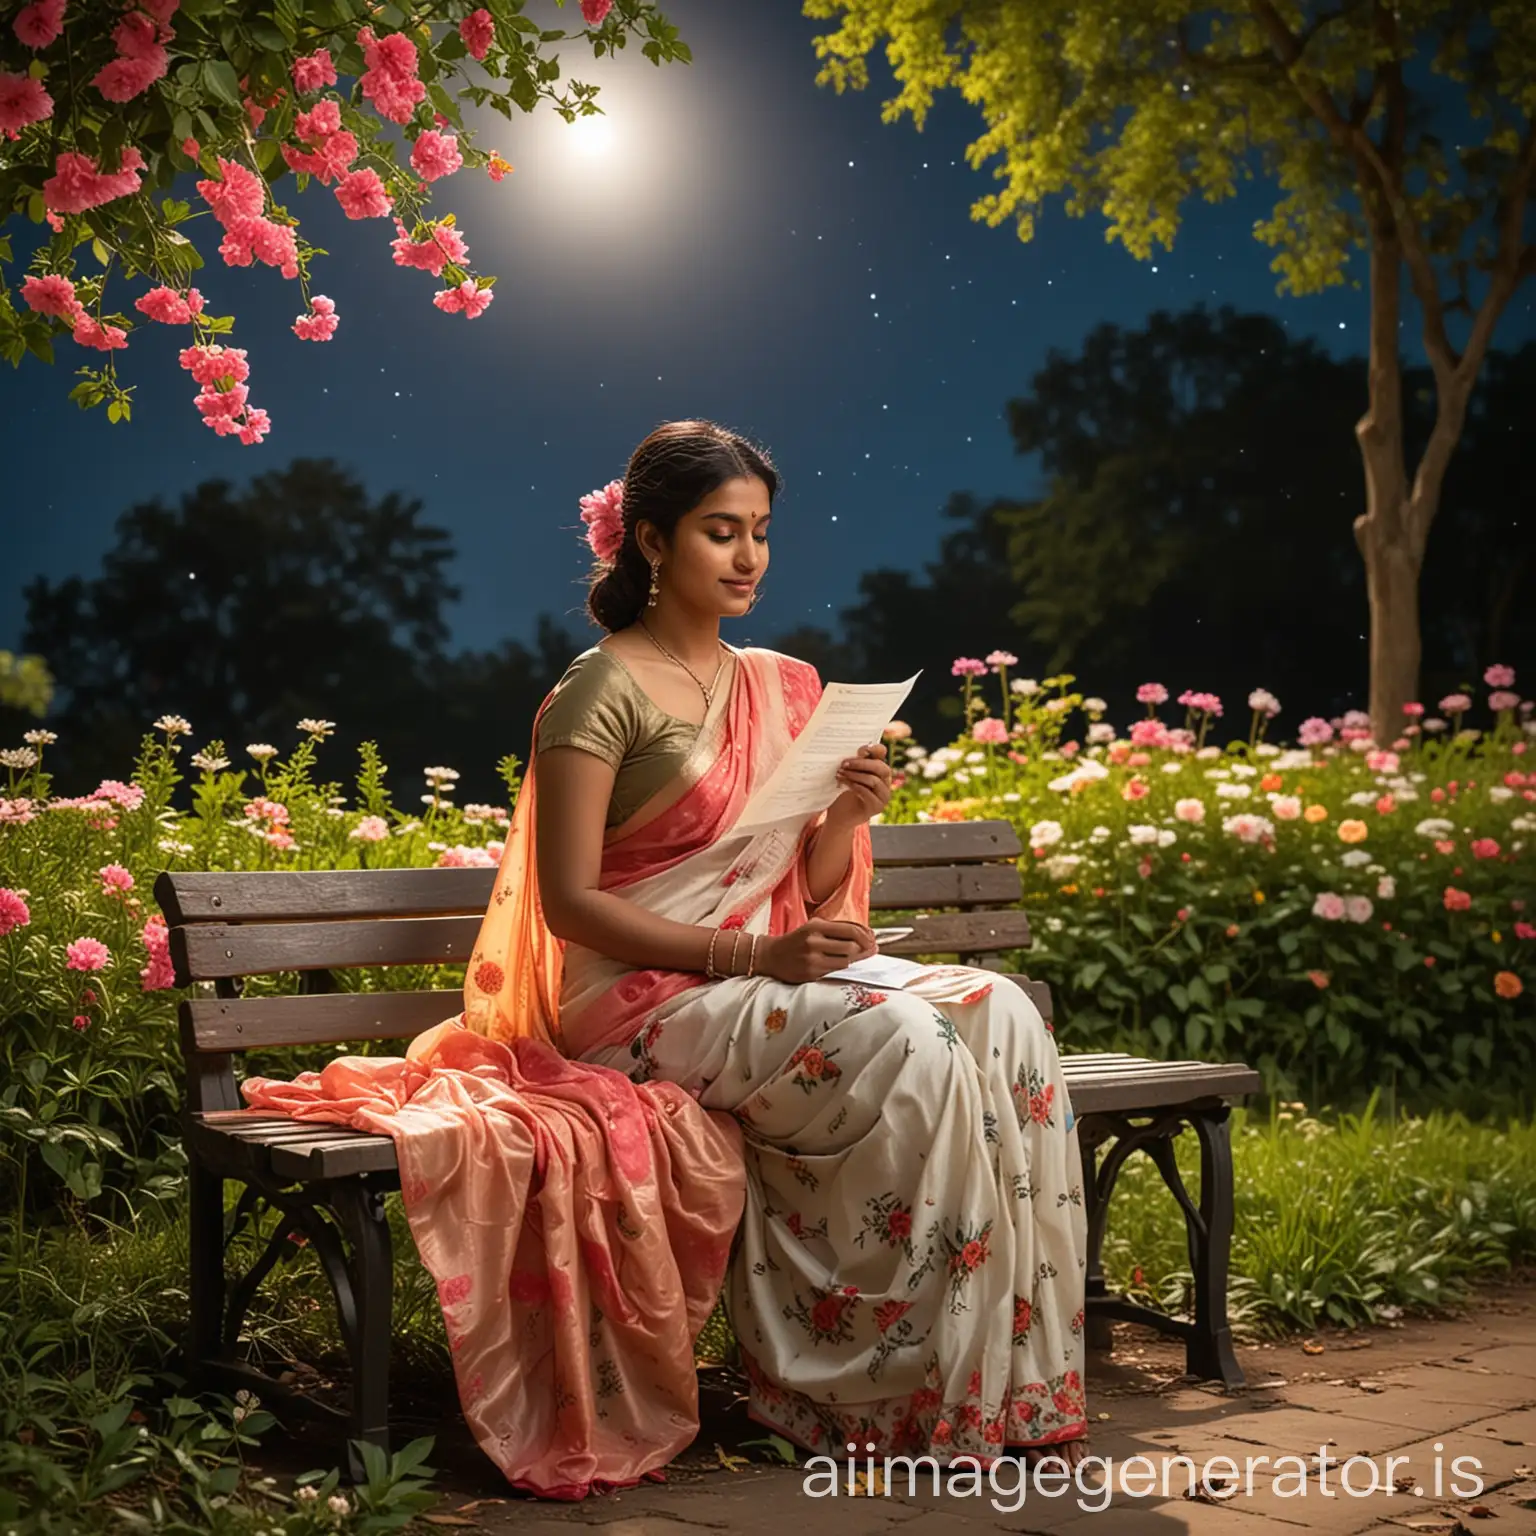 Indian-Woman-in-Saree-Reading-Love-Letter-under-Full-Moon-in-Park